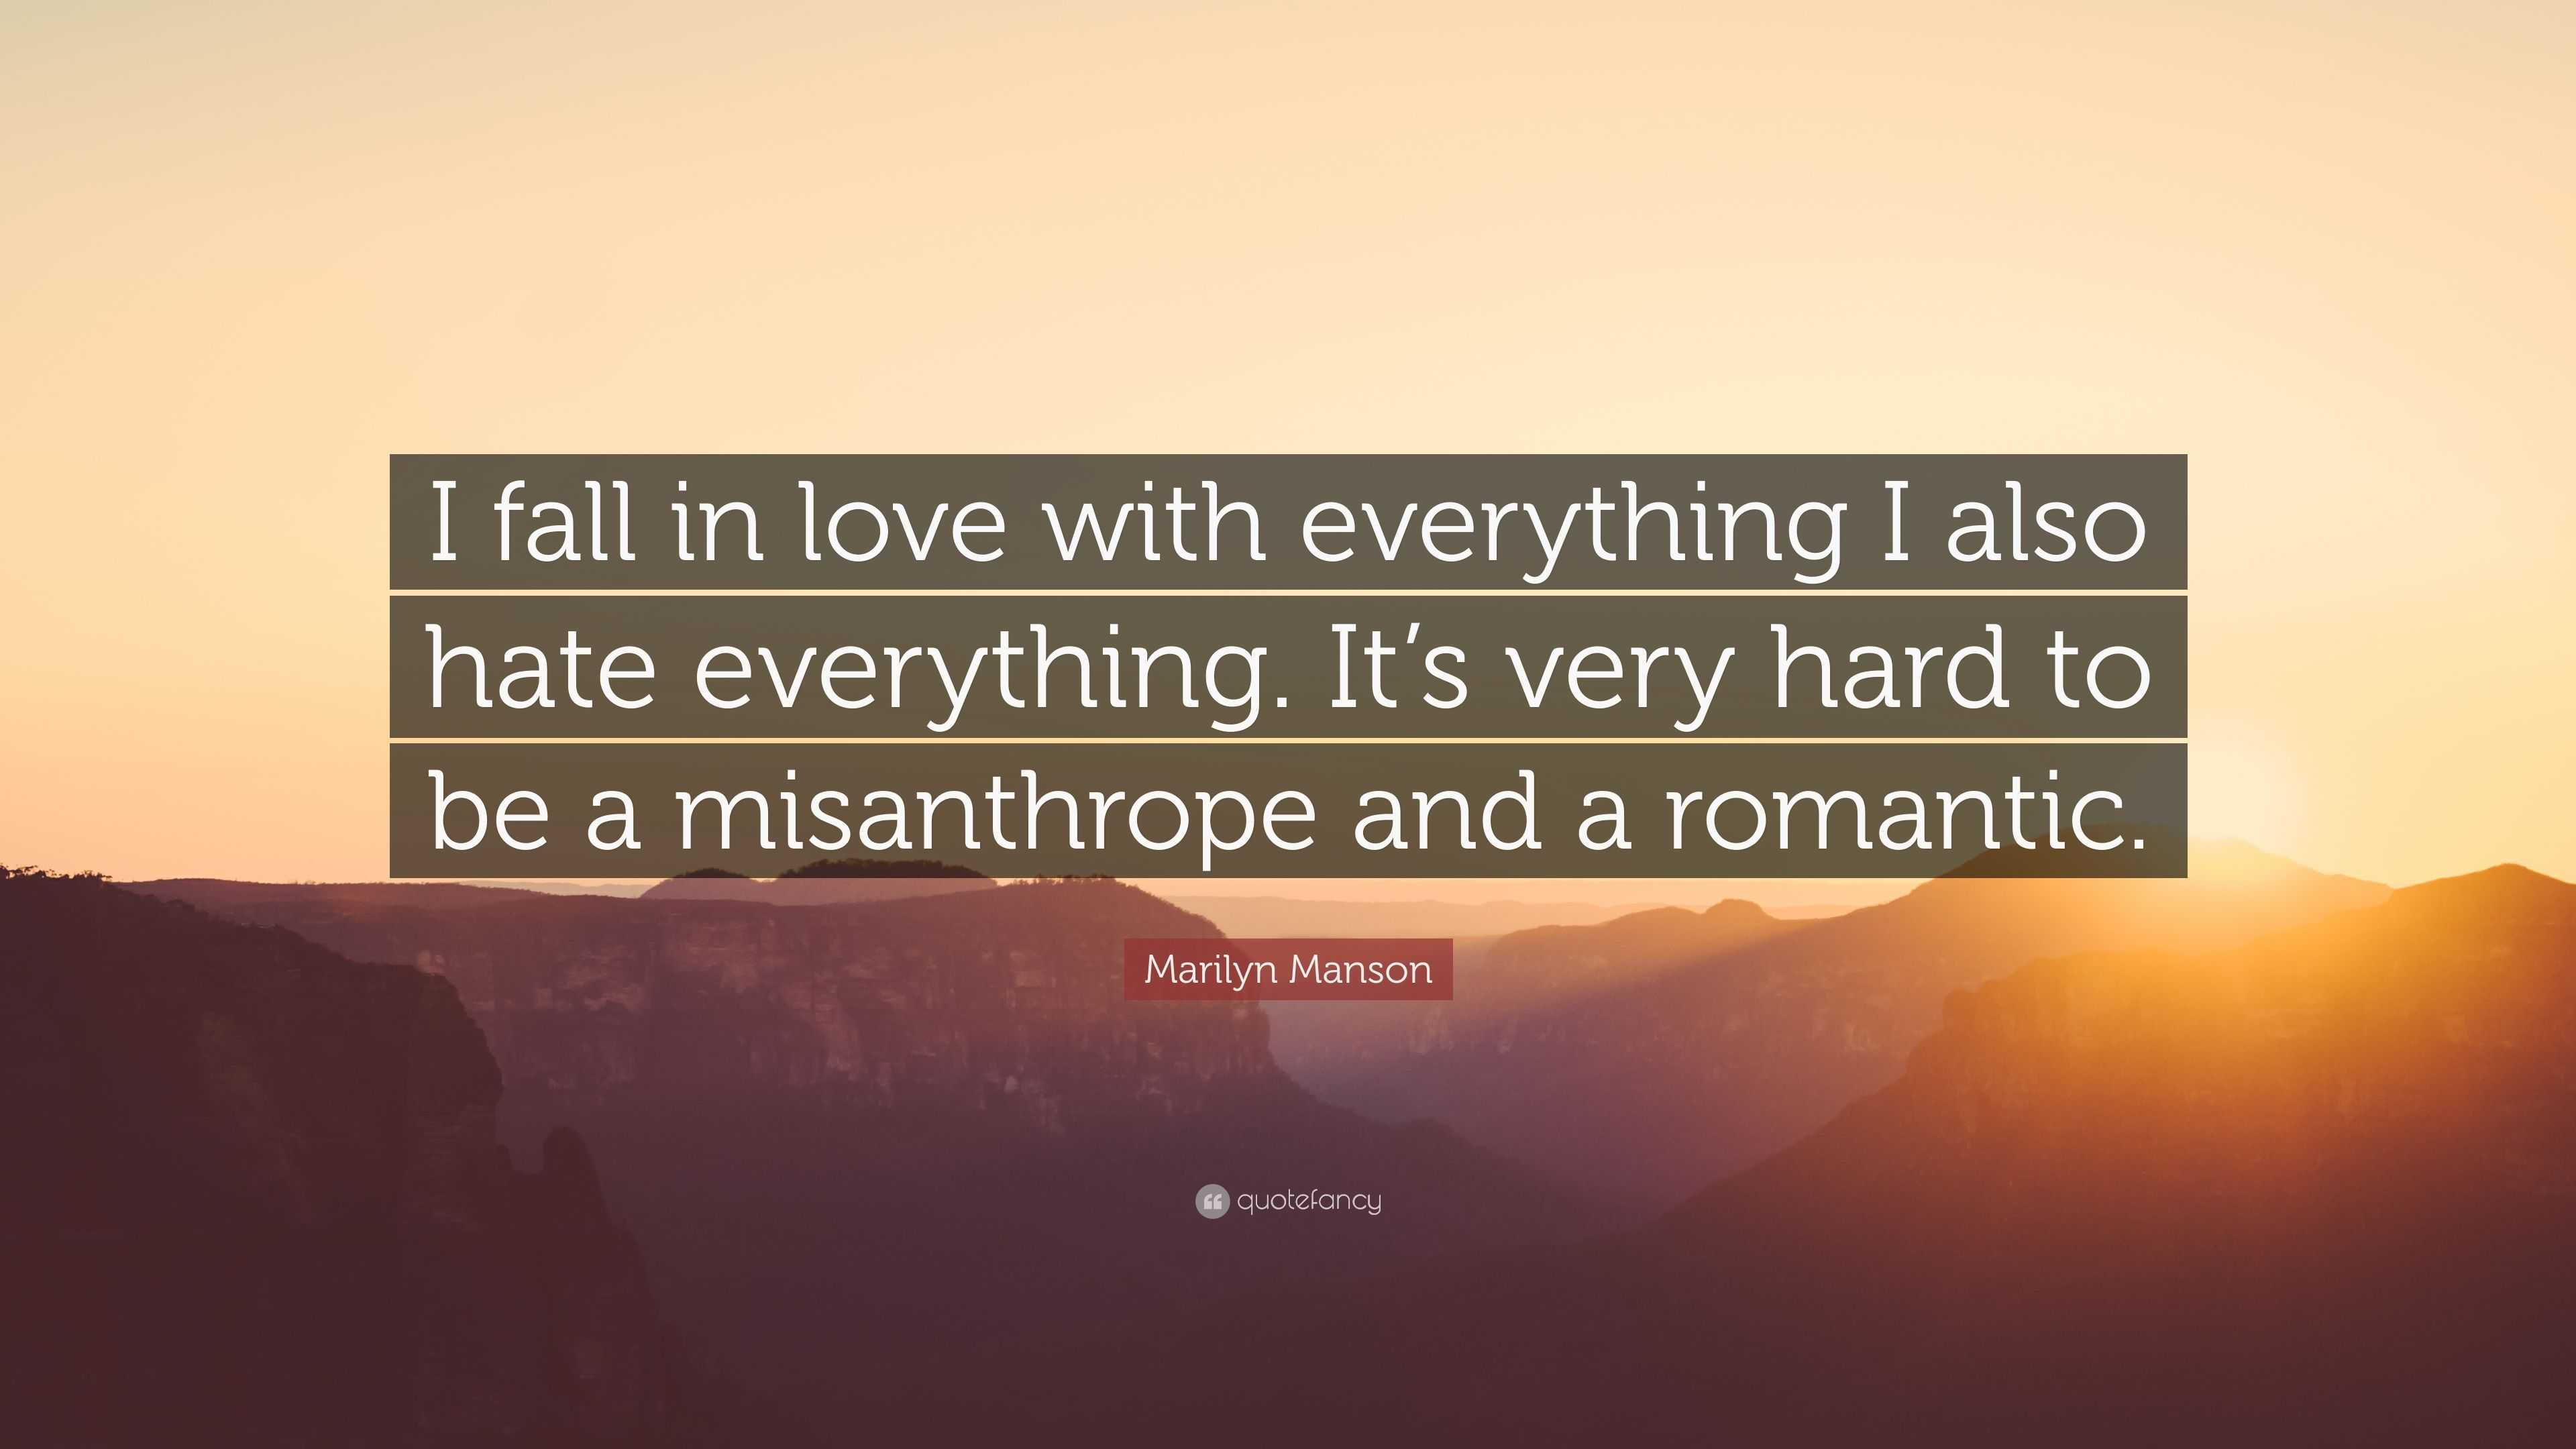 Marilyn Manson Quote “I fall in love with everything I also hate everything